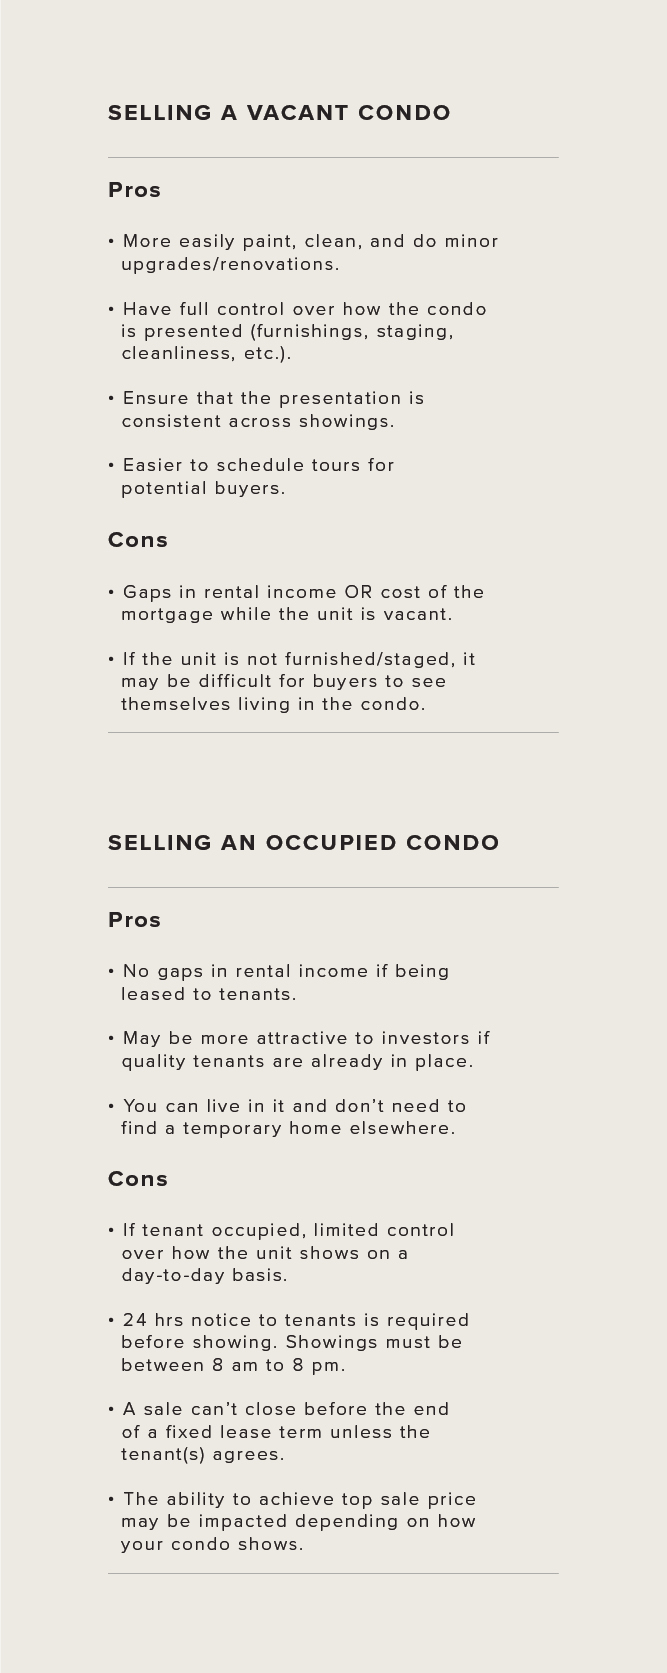 Pros and cons list of Selling a Vacant Condo and Selling an Occupied Condo